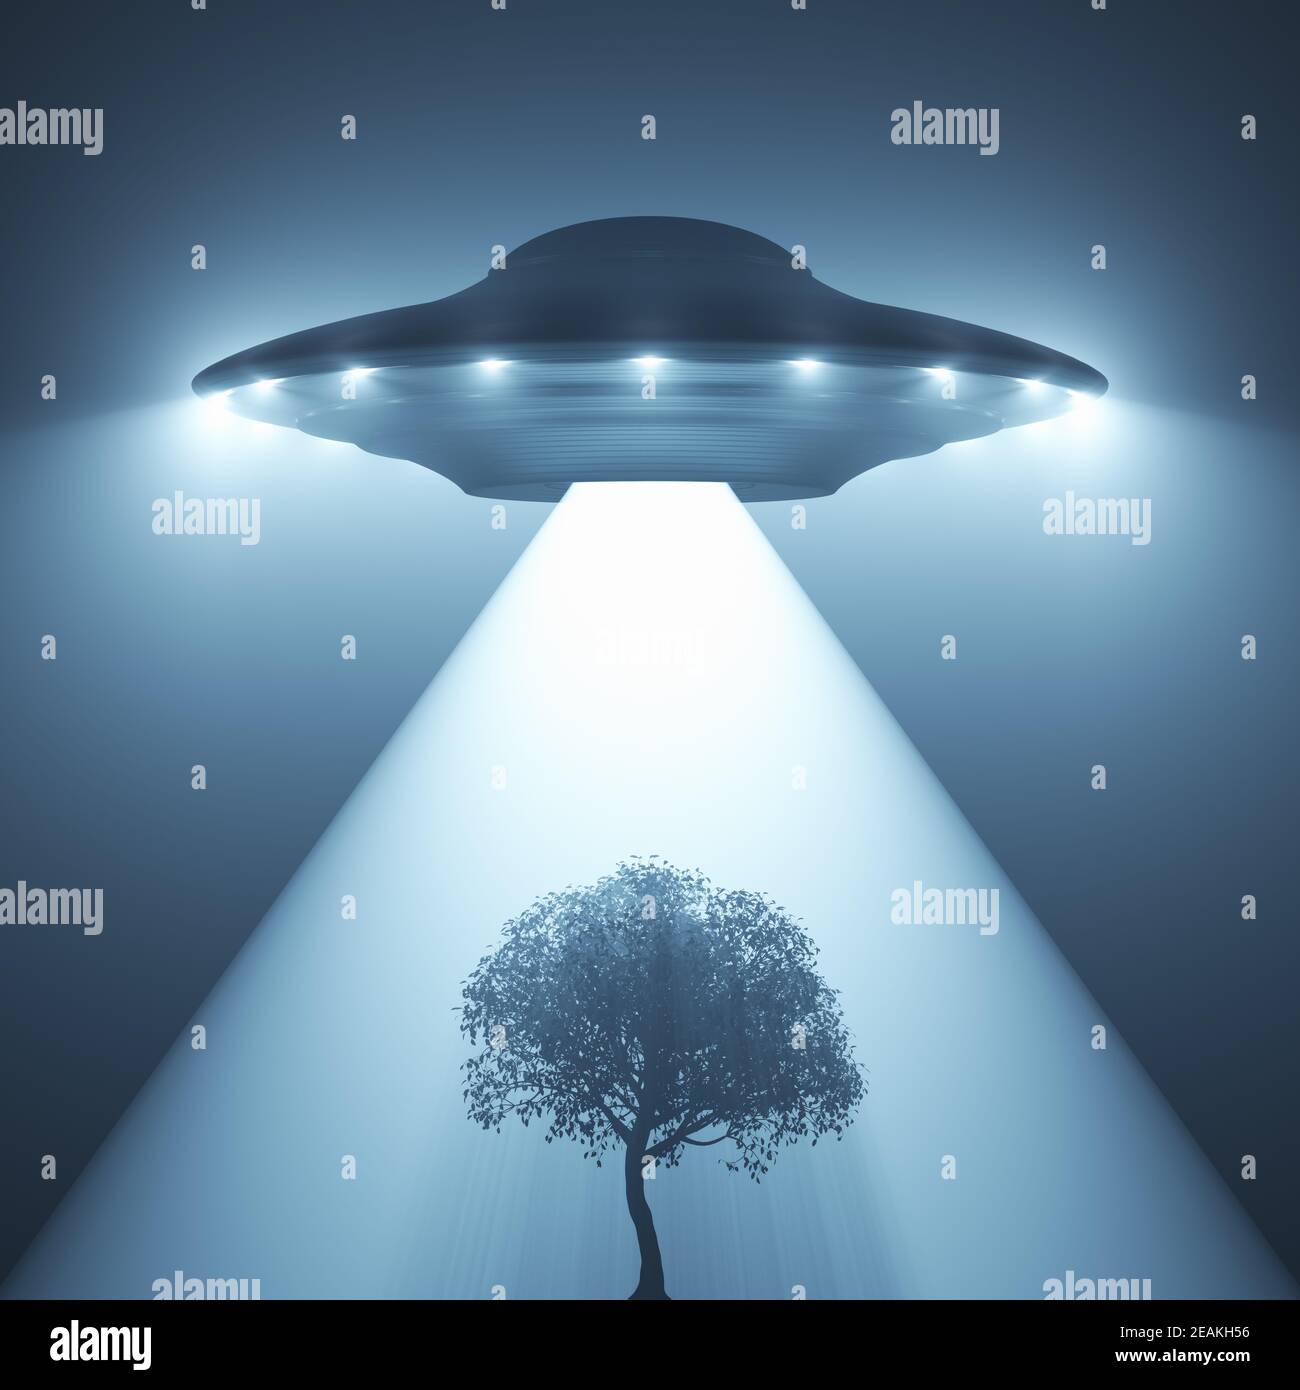 Unidentified Flying Object Stock Photo